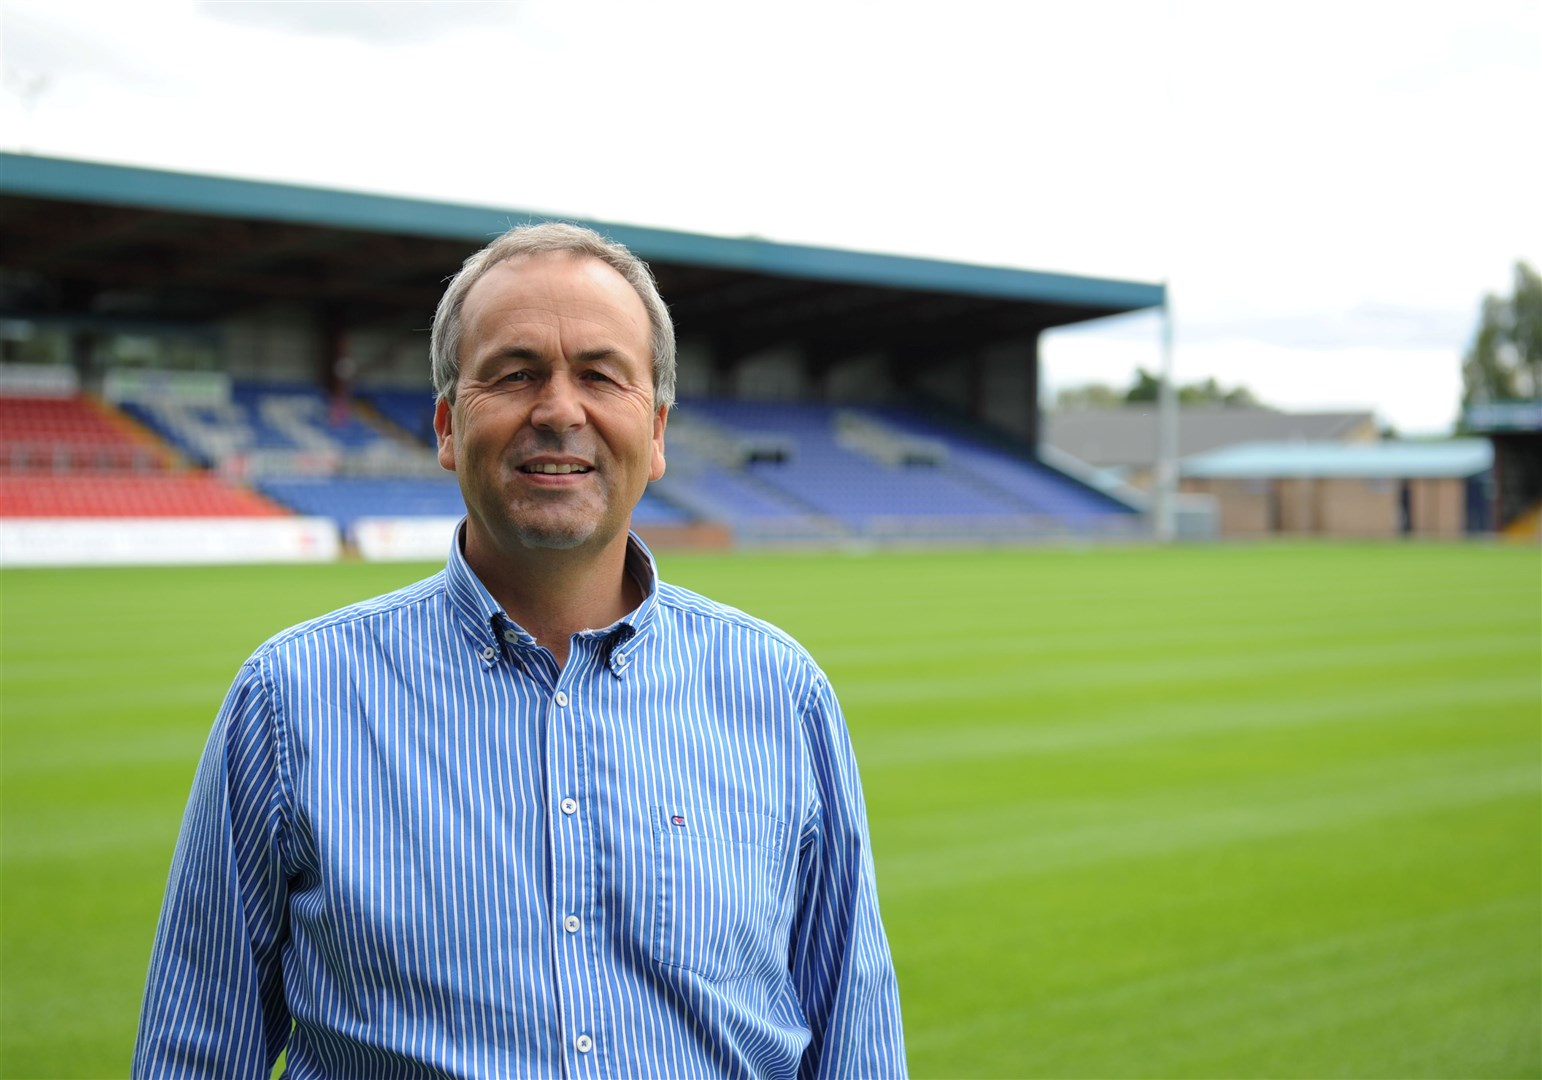 Ross County chairman Roy MacGregor was looking for established names in broadcasting to front up Ross County TV's coverage.